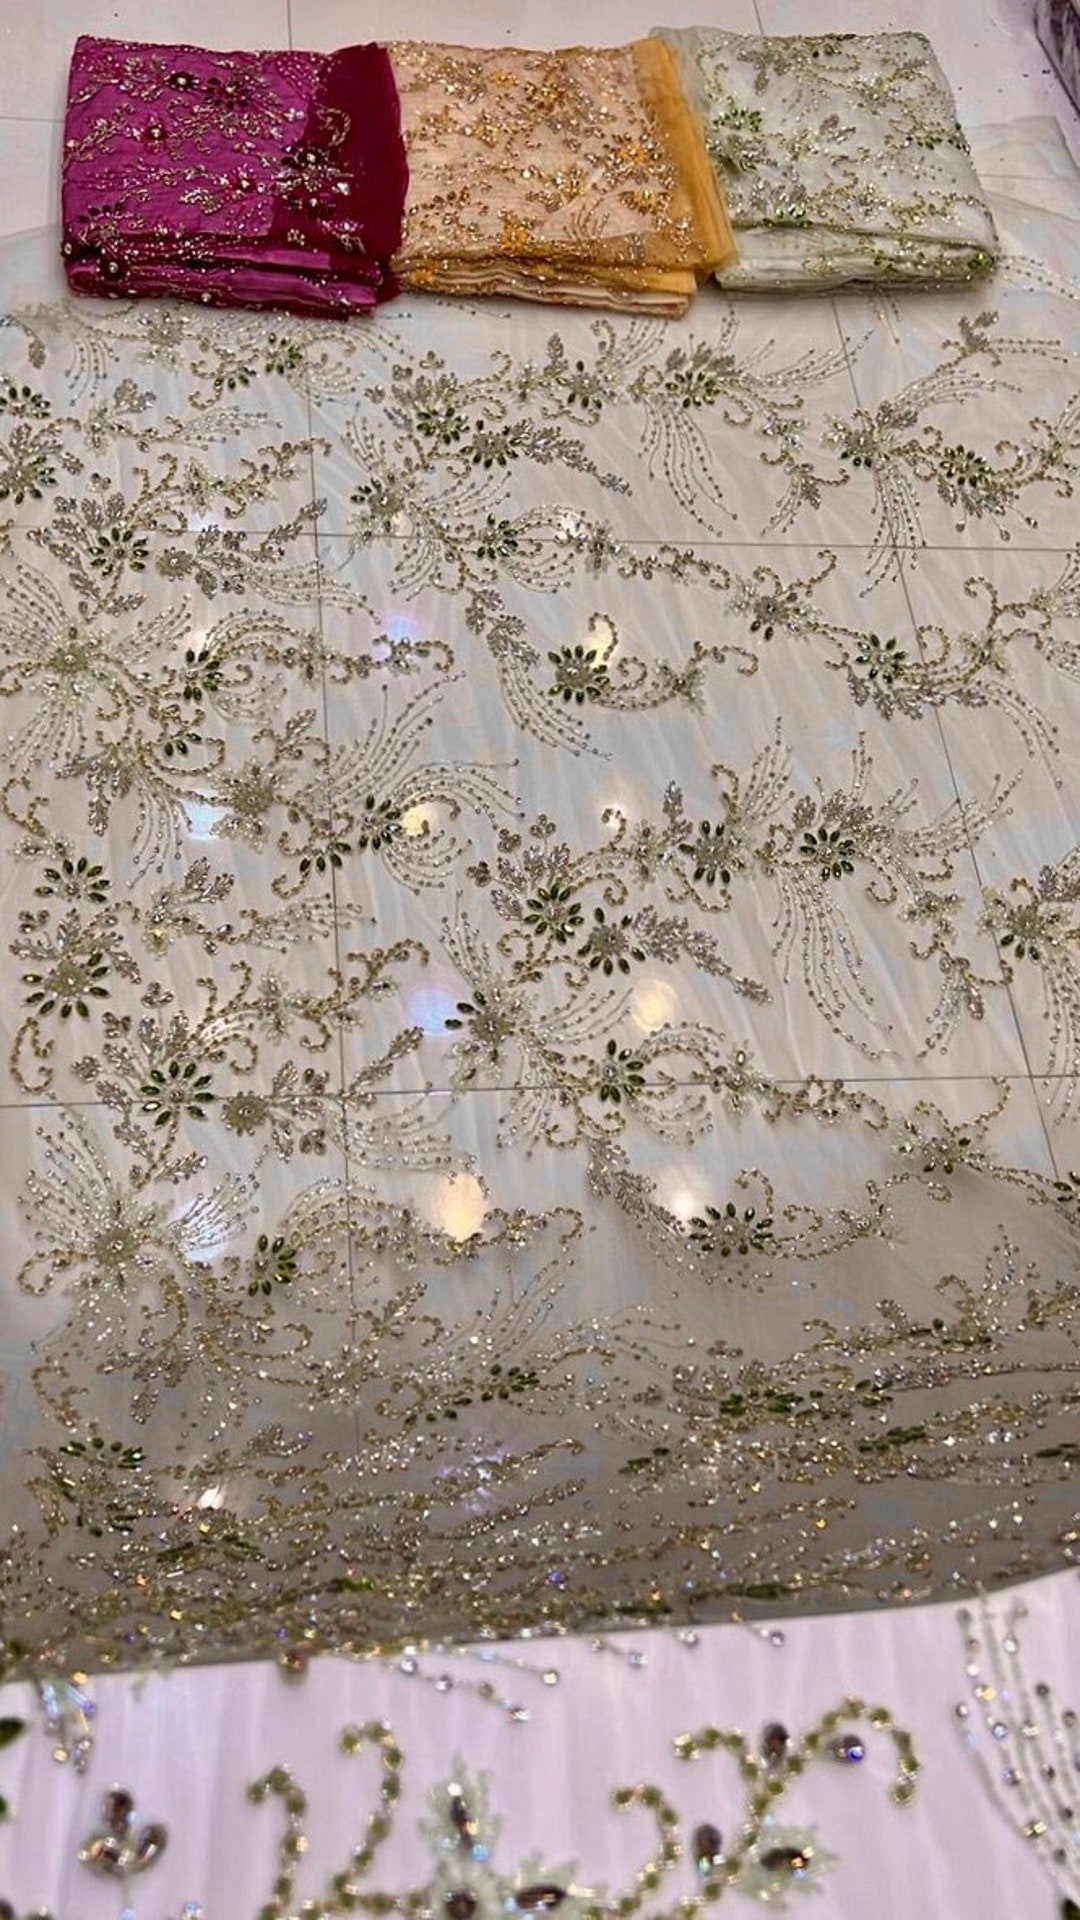 Gold 3D Rhinestone Lace Fabric by the Yard, Floral Crystal Beads Sew ...